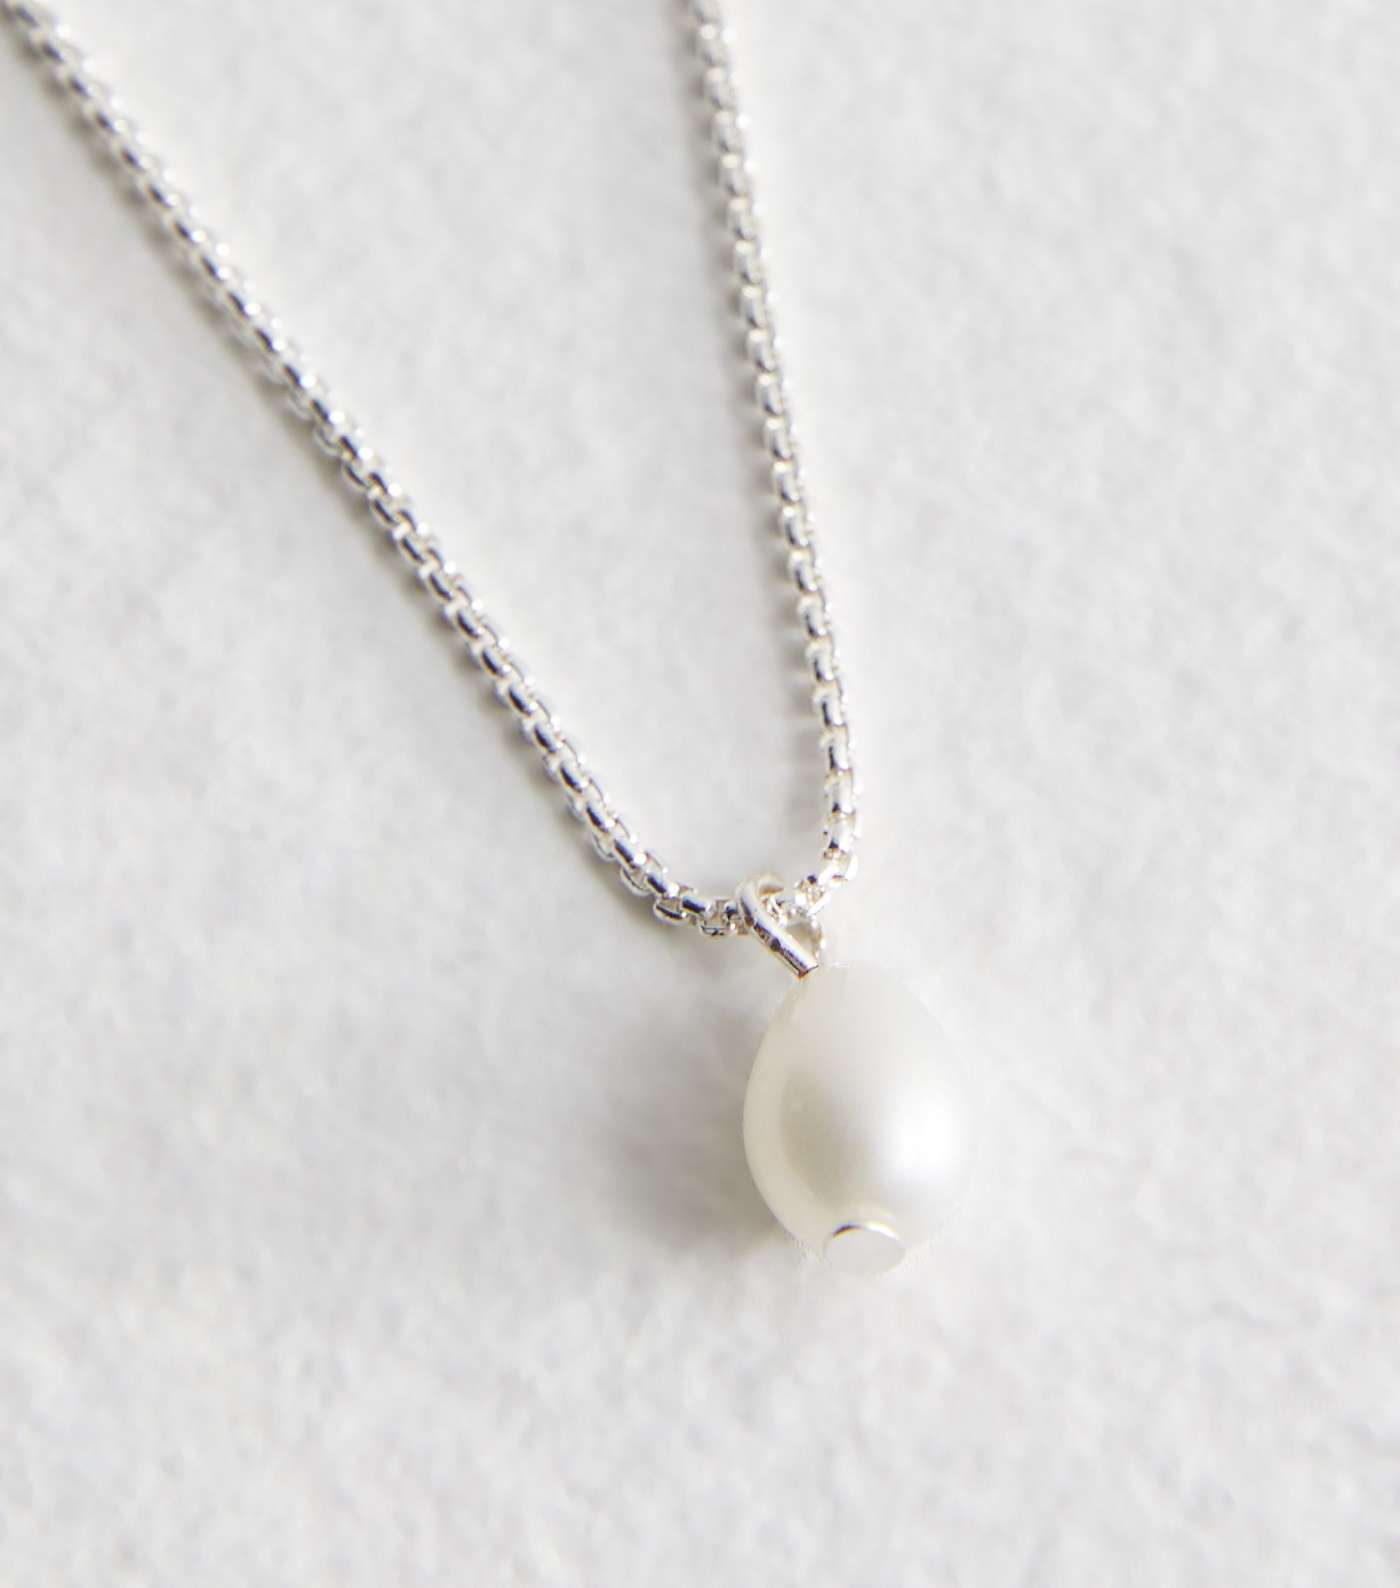 Real Silver Plate Faux Pearl Pendant Necklace Image 5